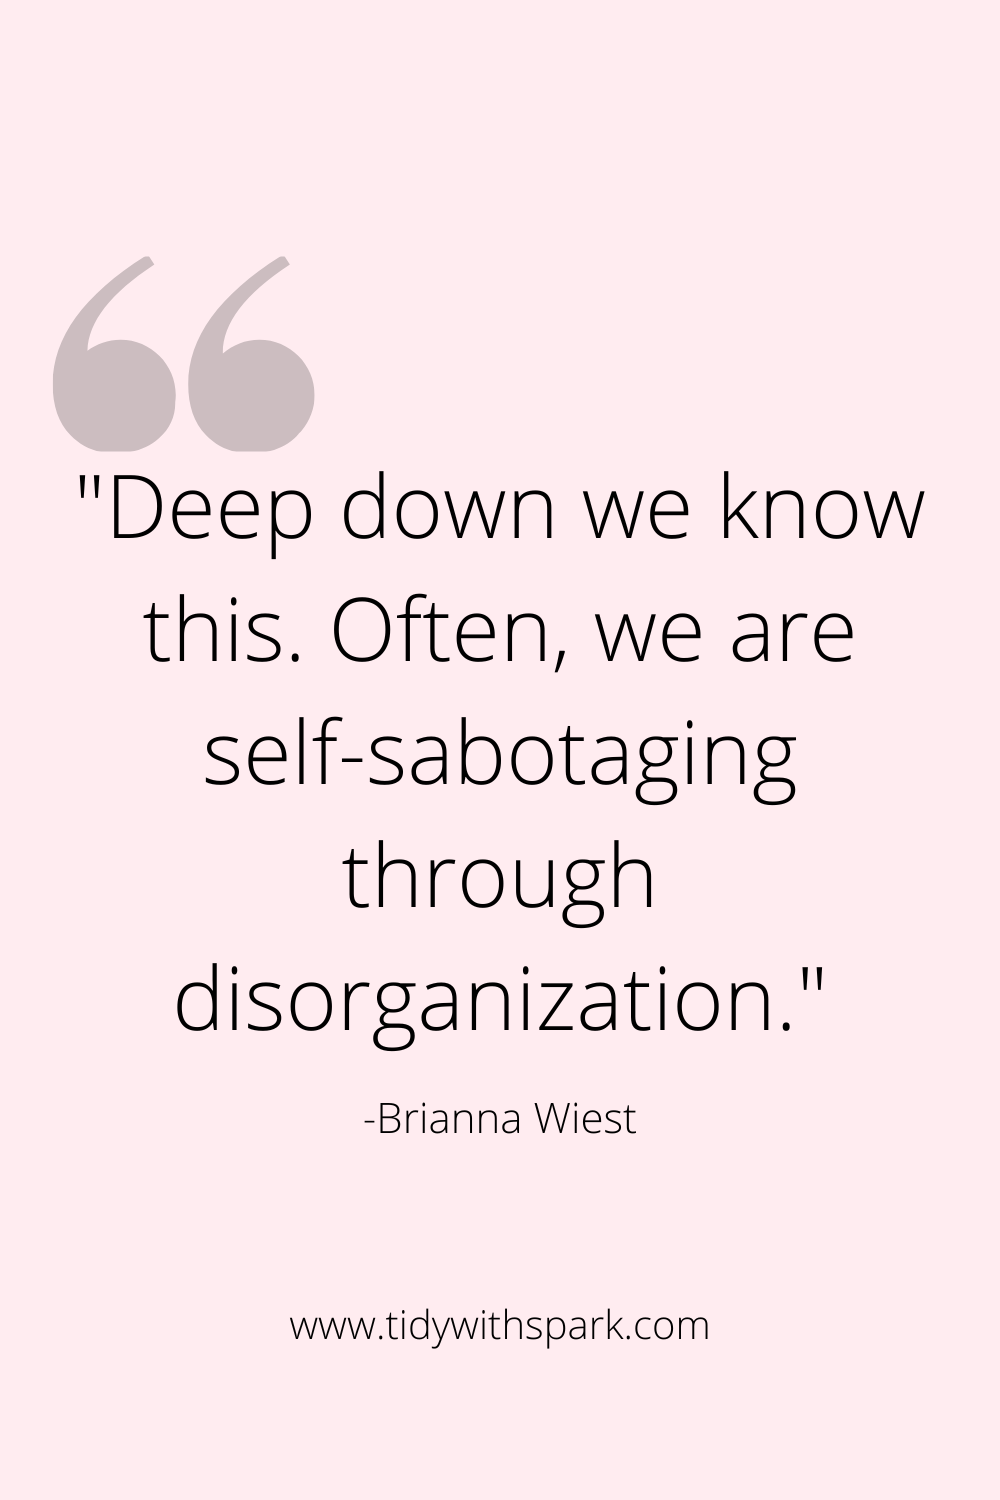 Deep down we know this. often, we are self-sabotaging through disorganization. Brianna Wiest quote tidywithspark.com